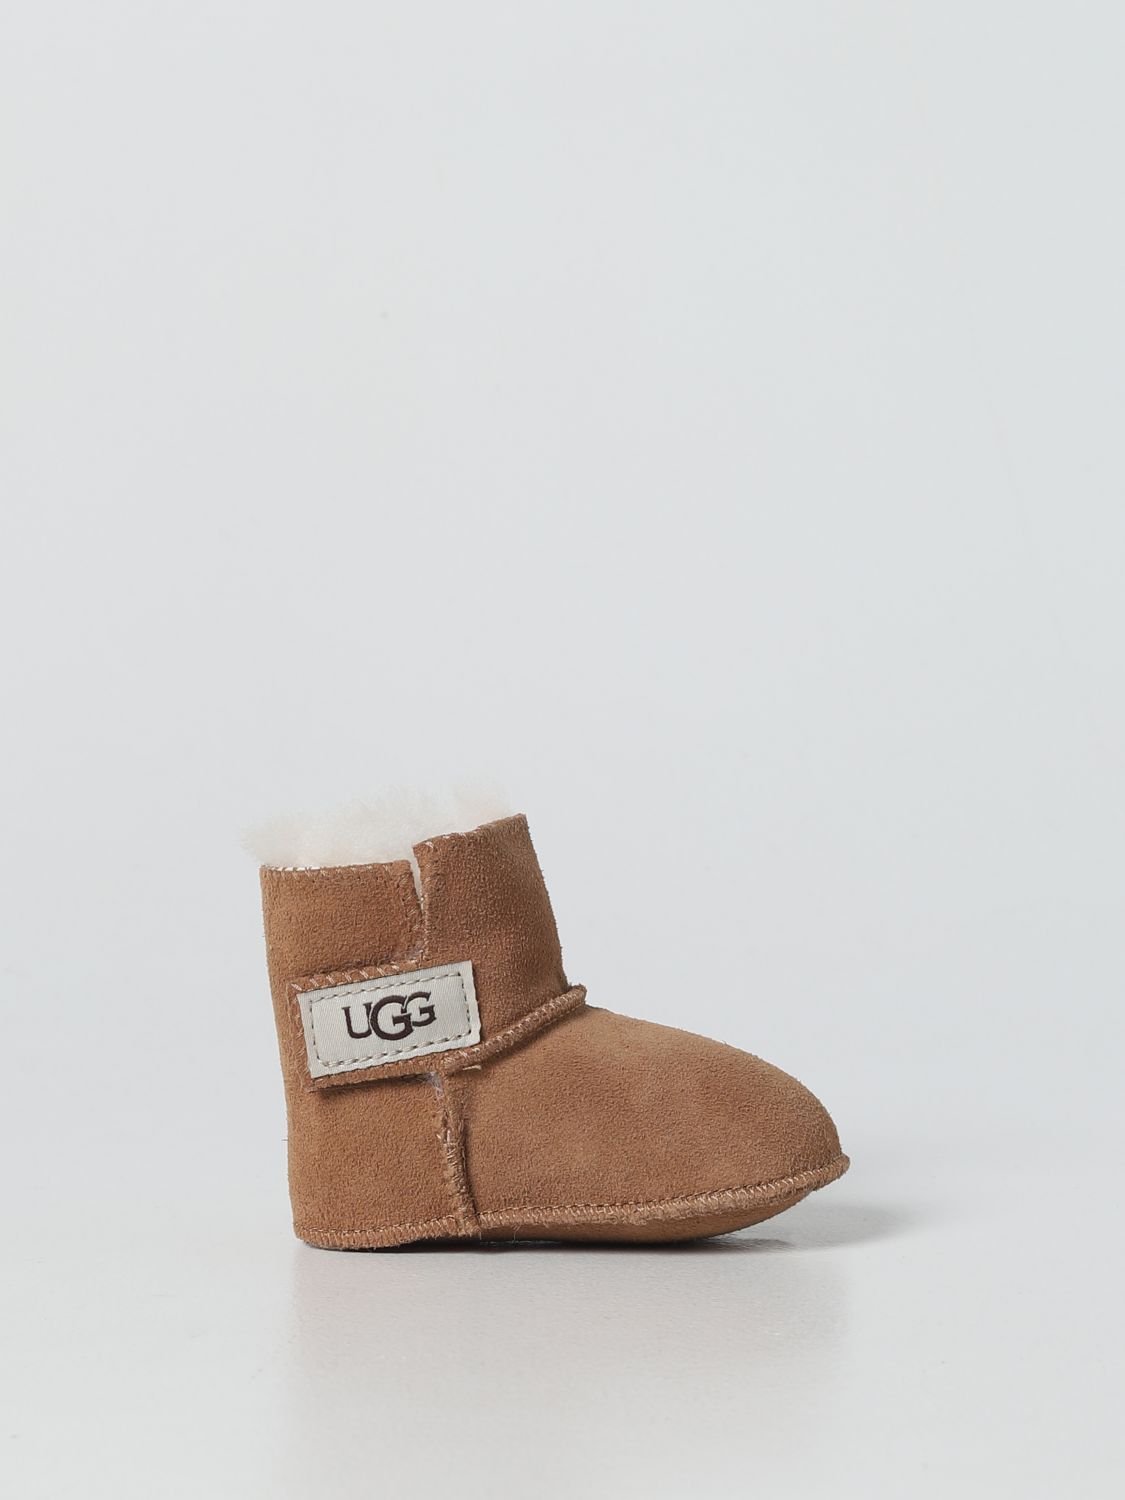 Ugg shoes for baby